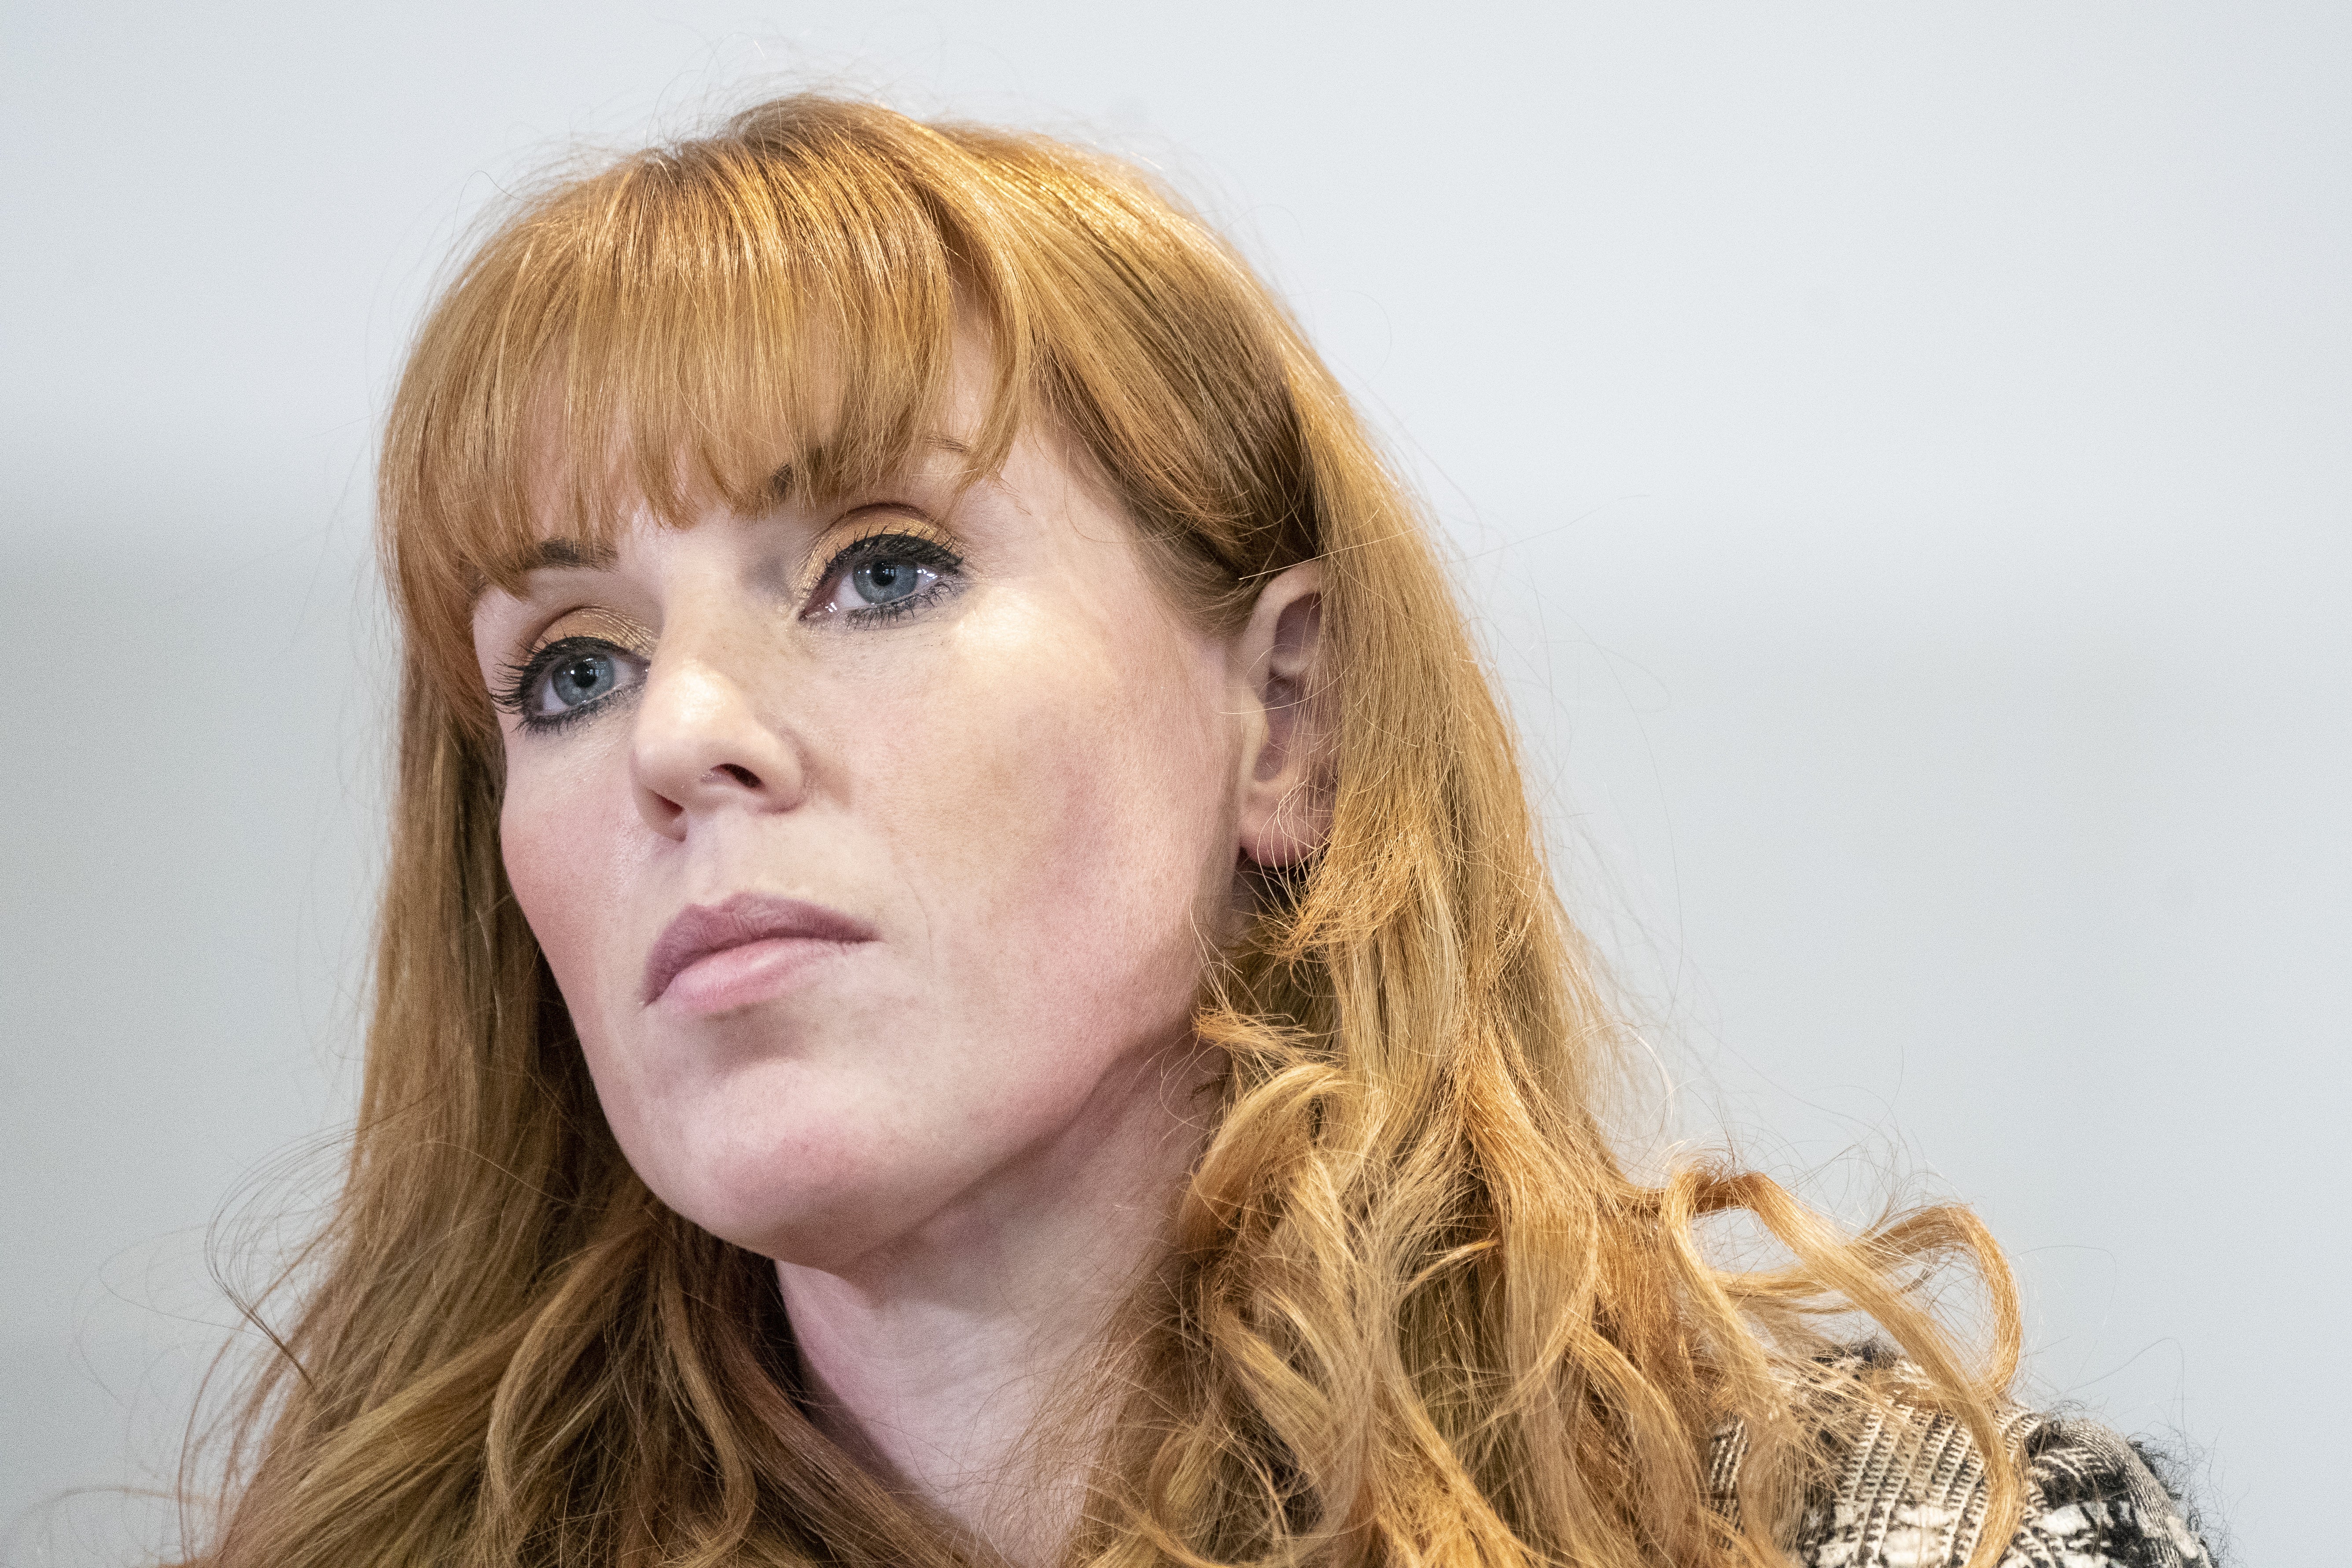 Labour deputy leader Angela Rayner said Mr Johnson had crossed a ‘red line’ and should go (Dominic Lipinski/PA)